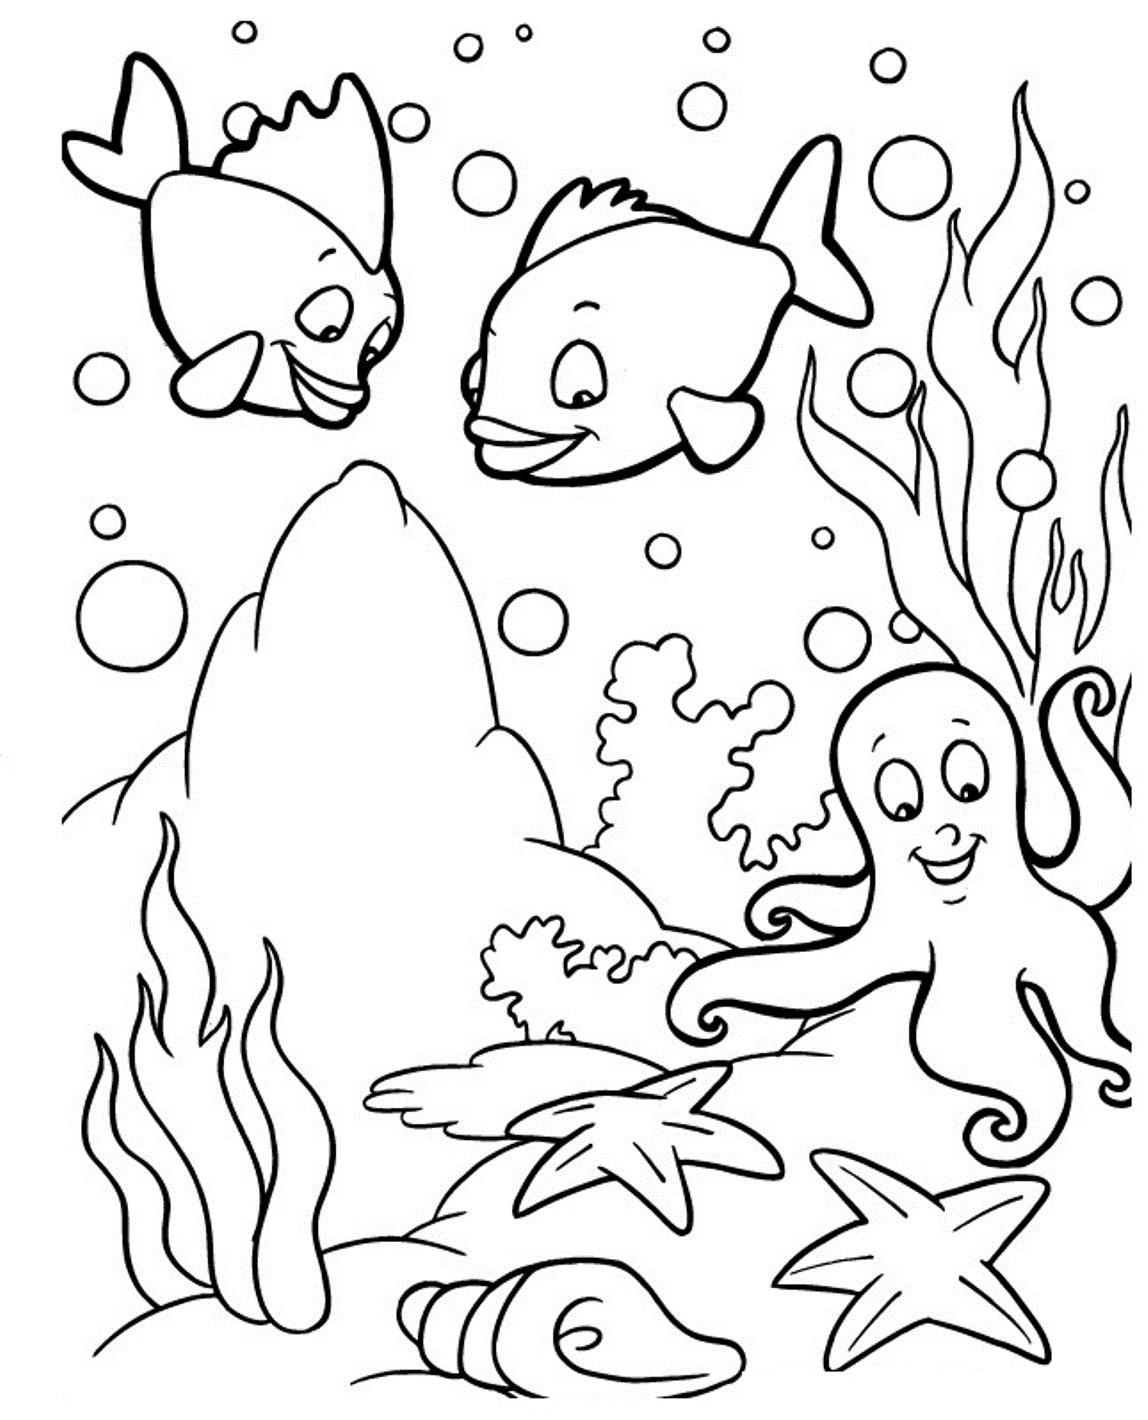 Coloring Pages Of Sea Animals For Kids499f Coloring Page